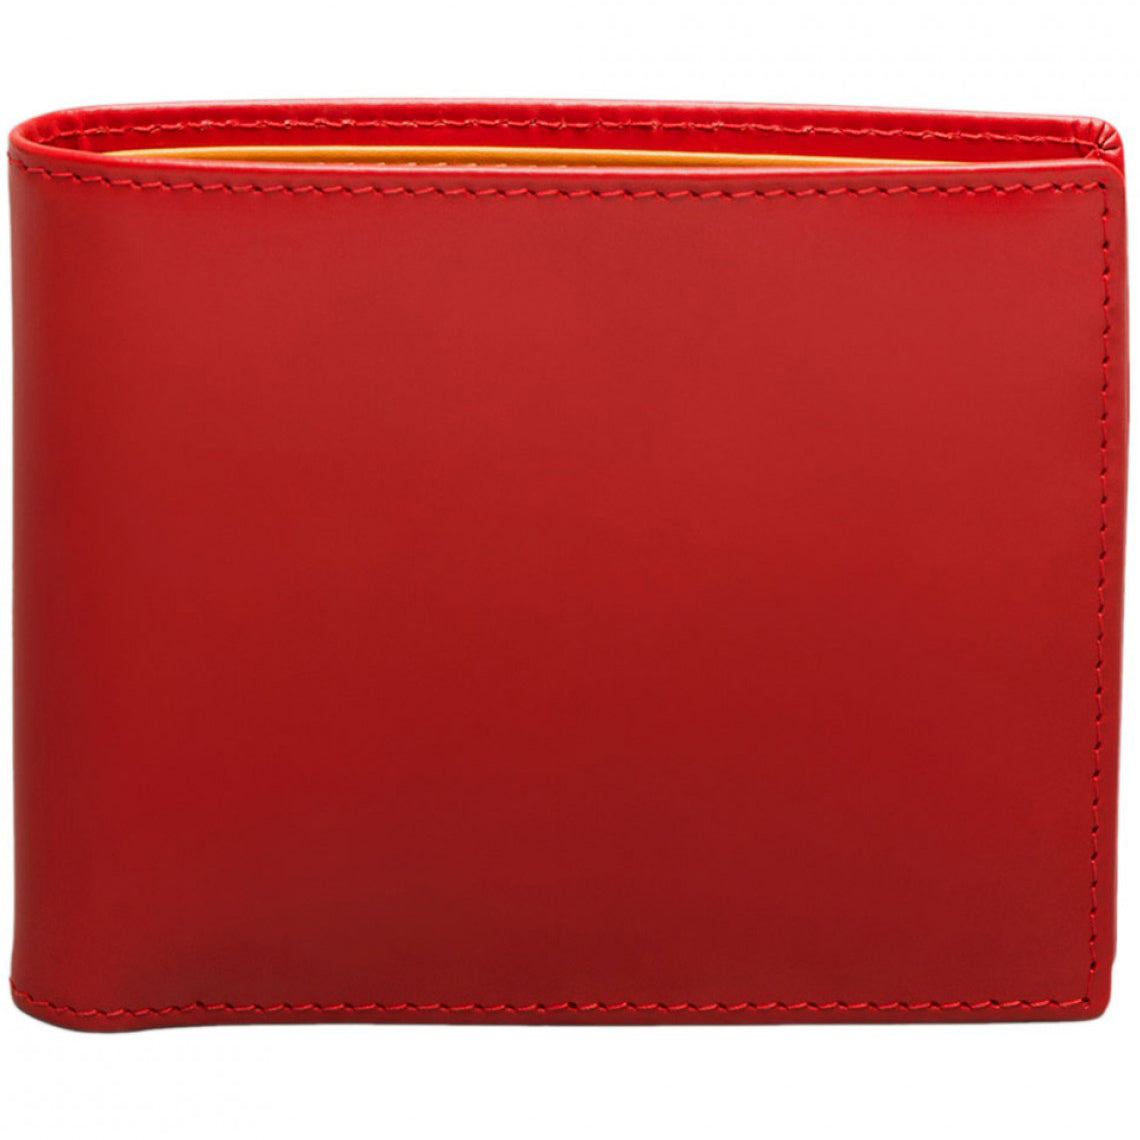 Ettinger Bridle Hide Billfold with 6 Credit Card Slips, Red